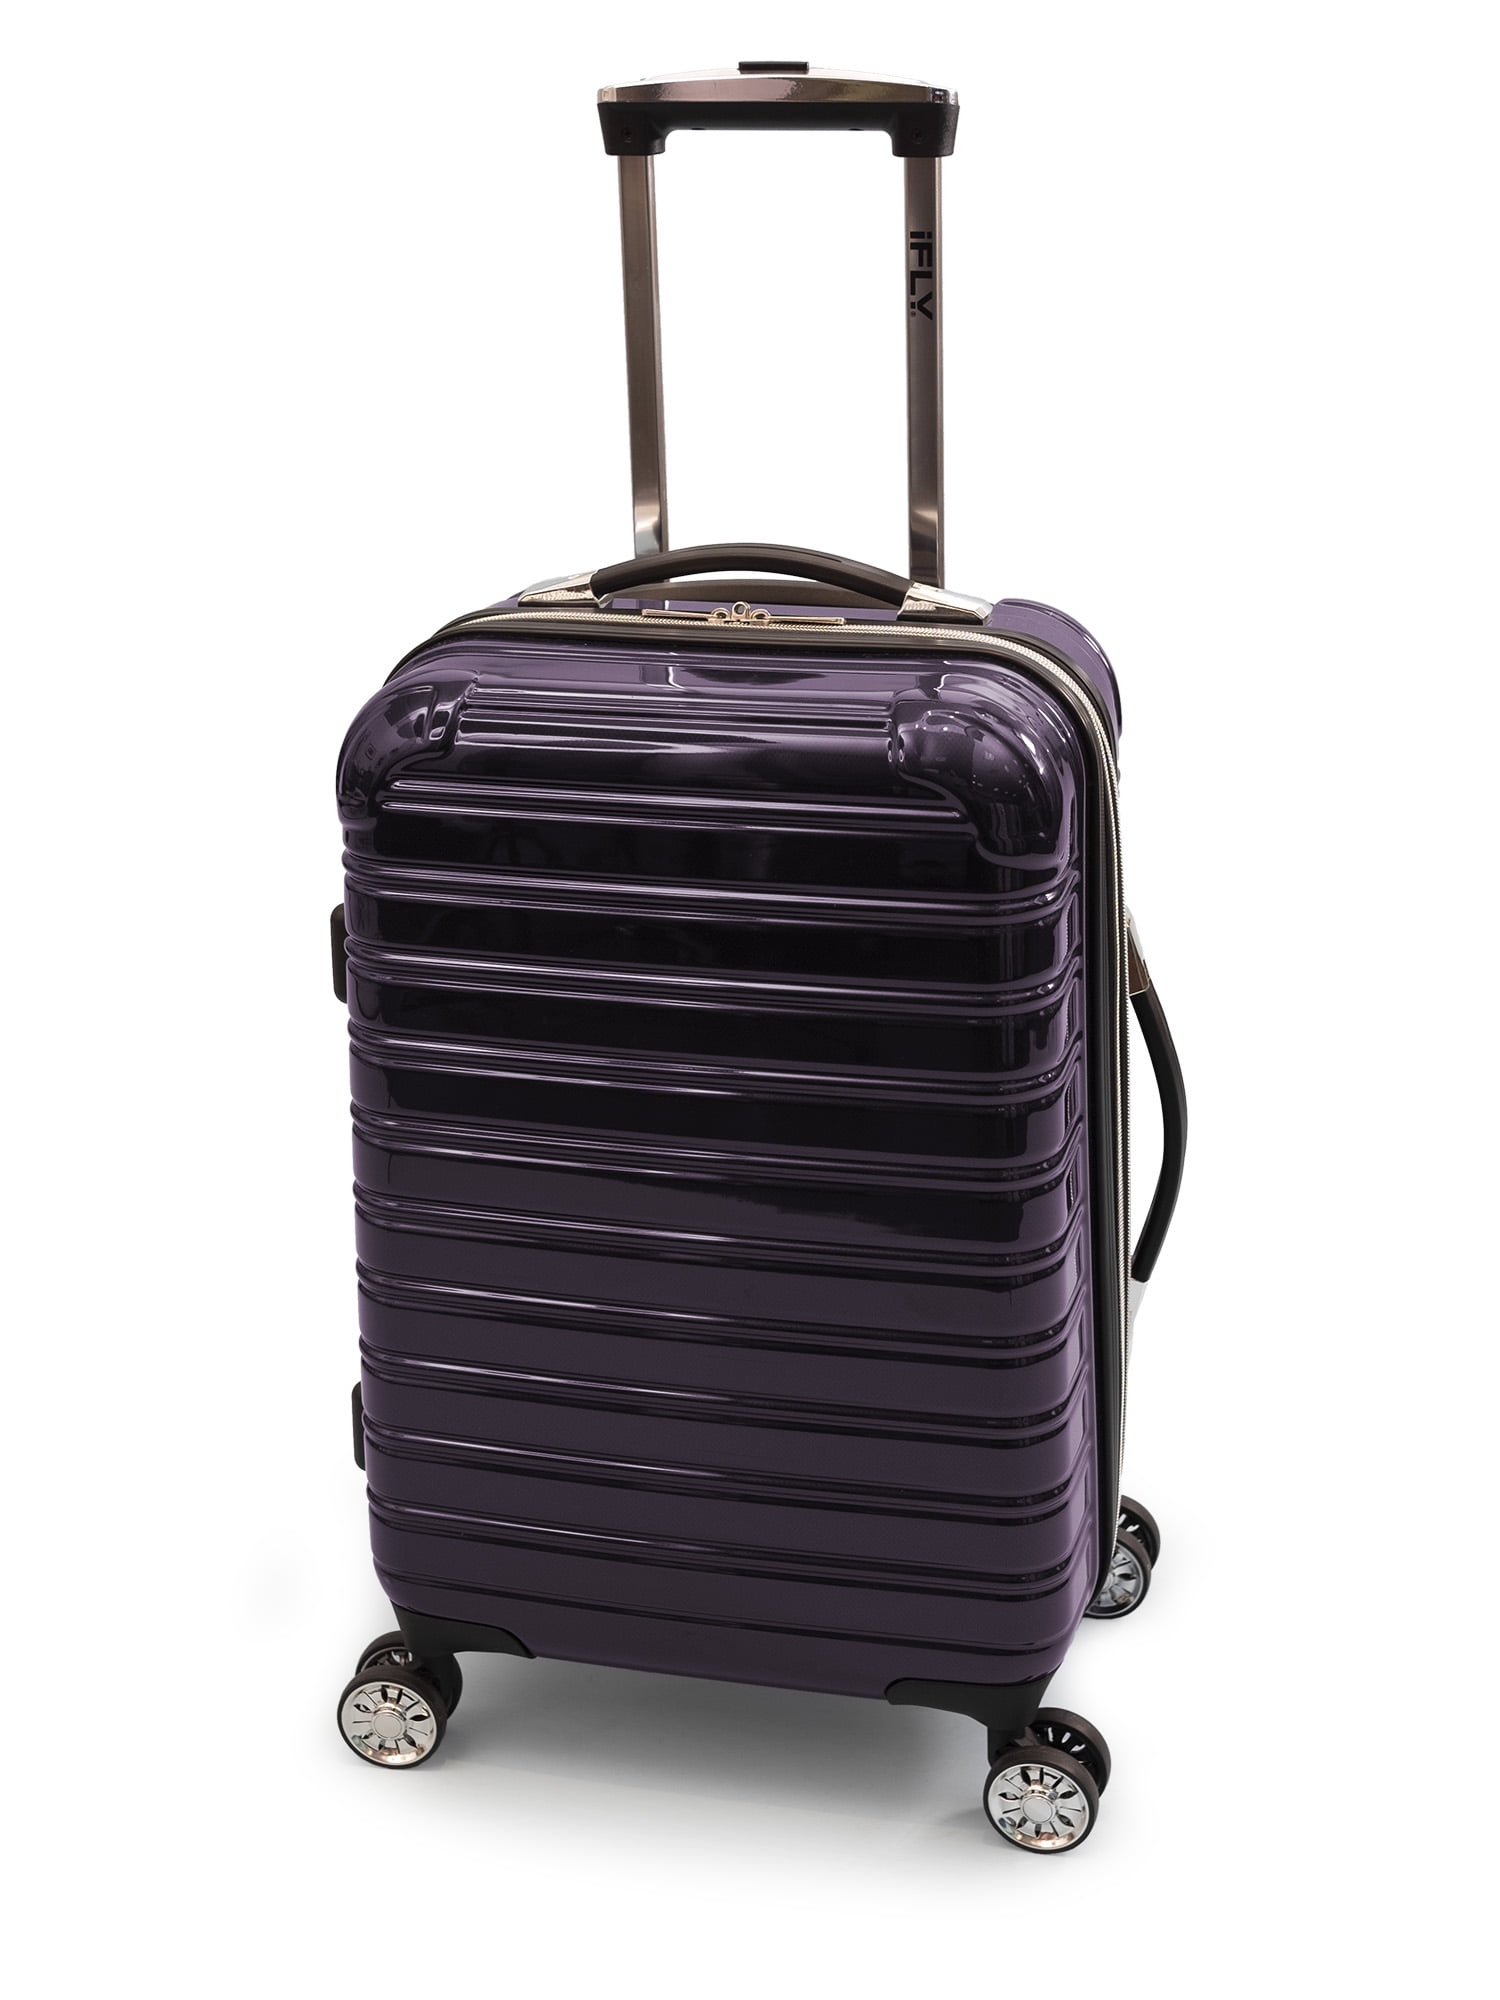 iFLY Hard Sided Fibertech Carry On Luggage, 20&quot; - mediakits.theygsgroup.com